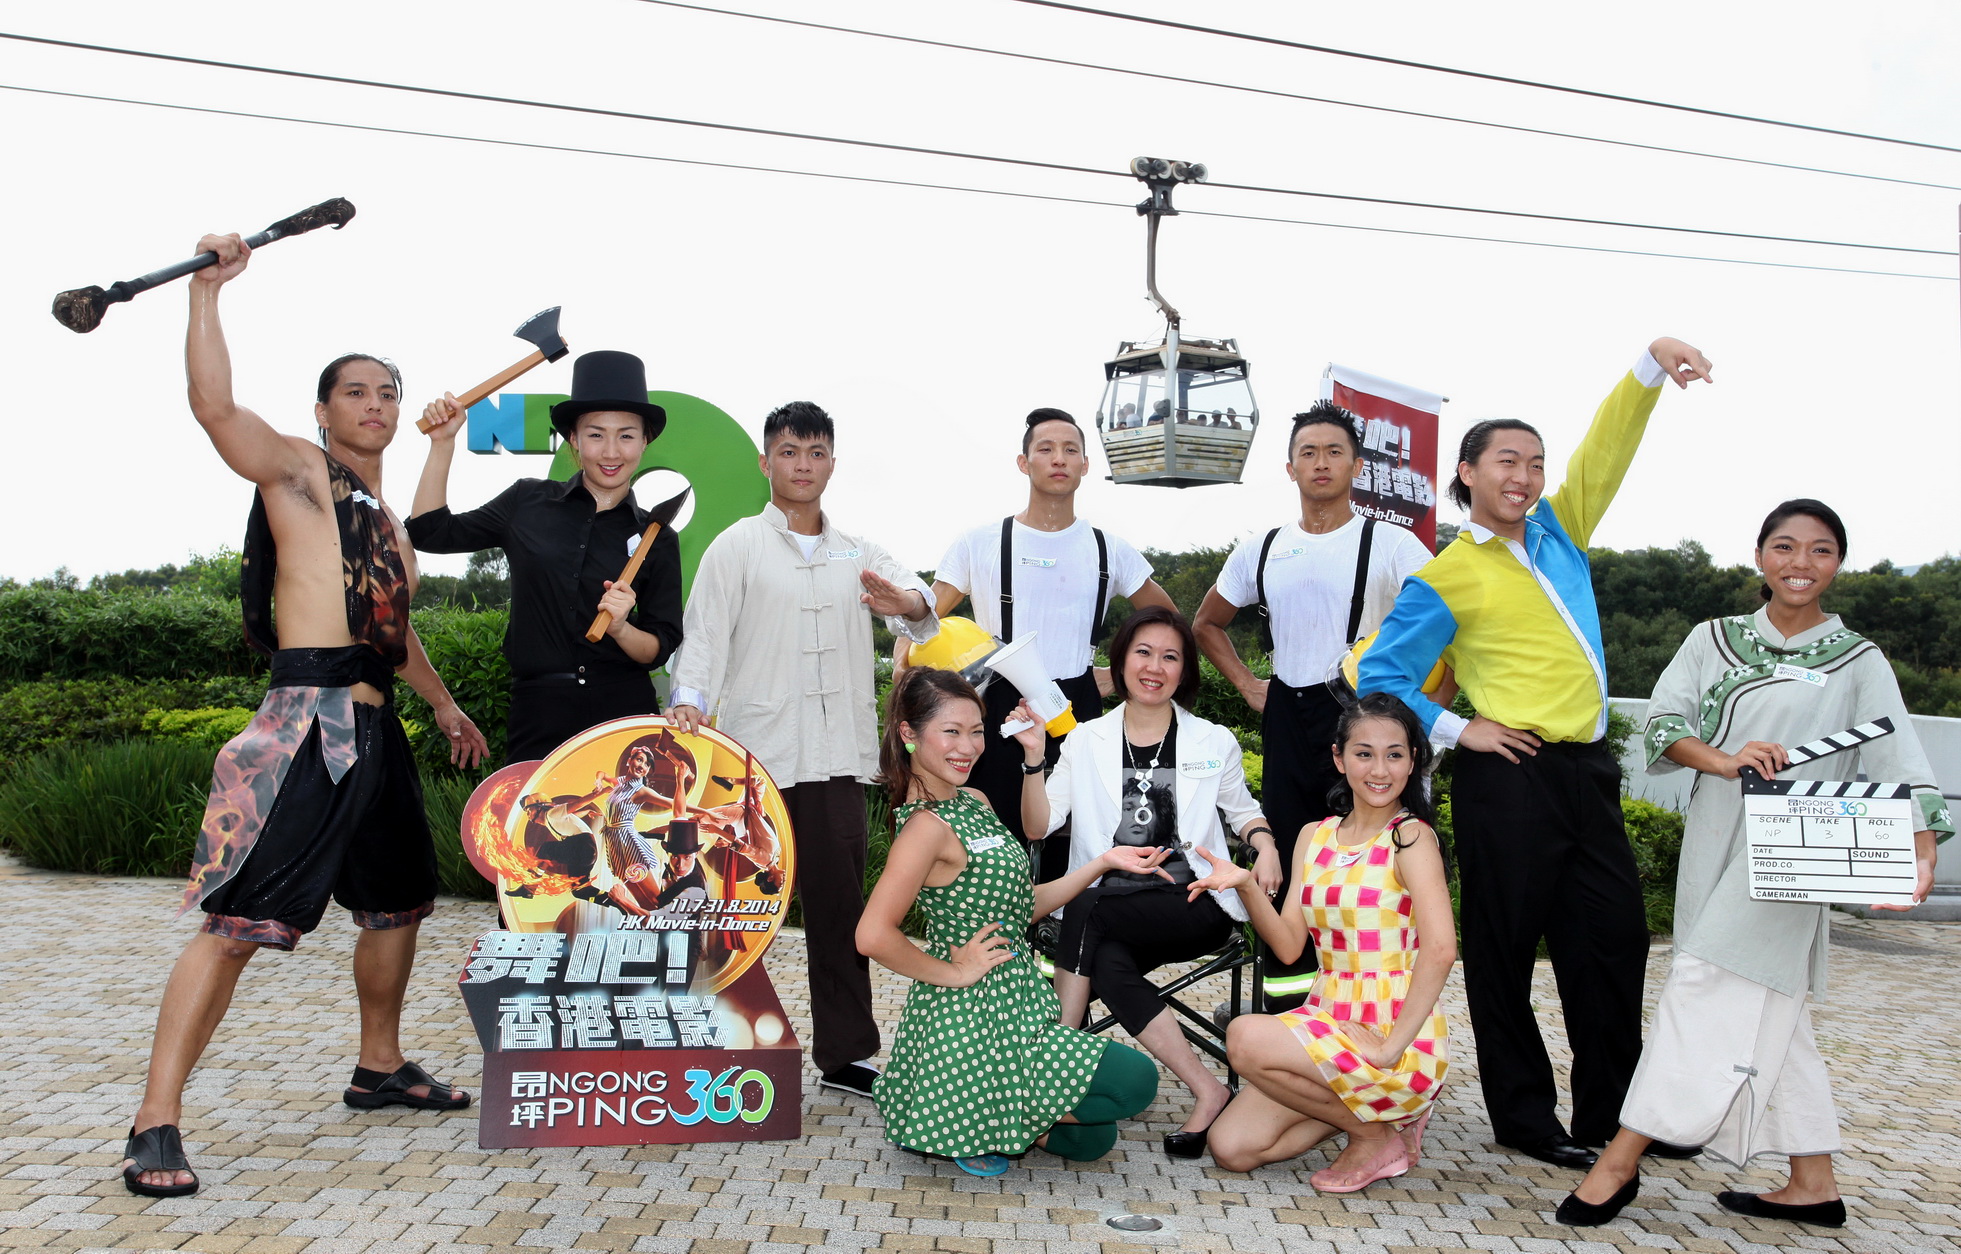 HK First Large-scale Outdoor Variety Performance Upcoming